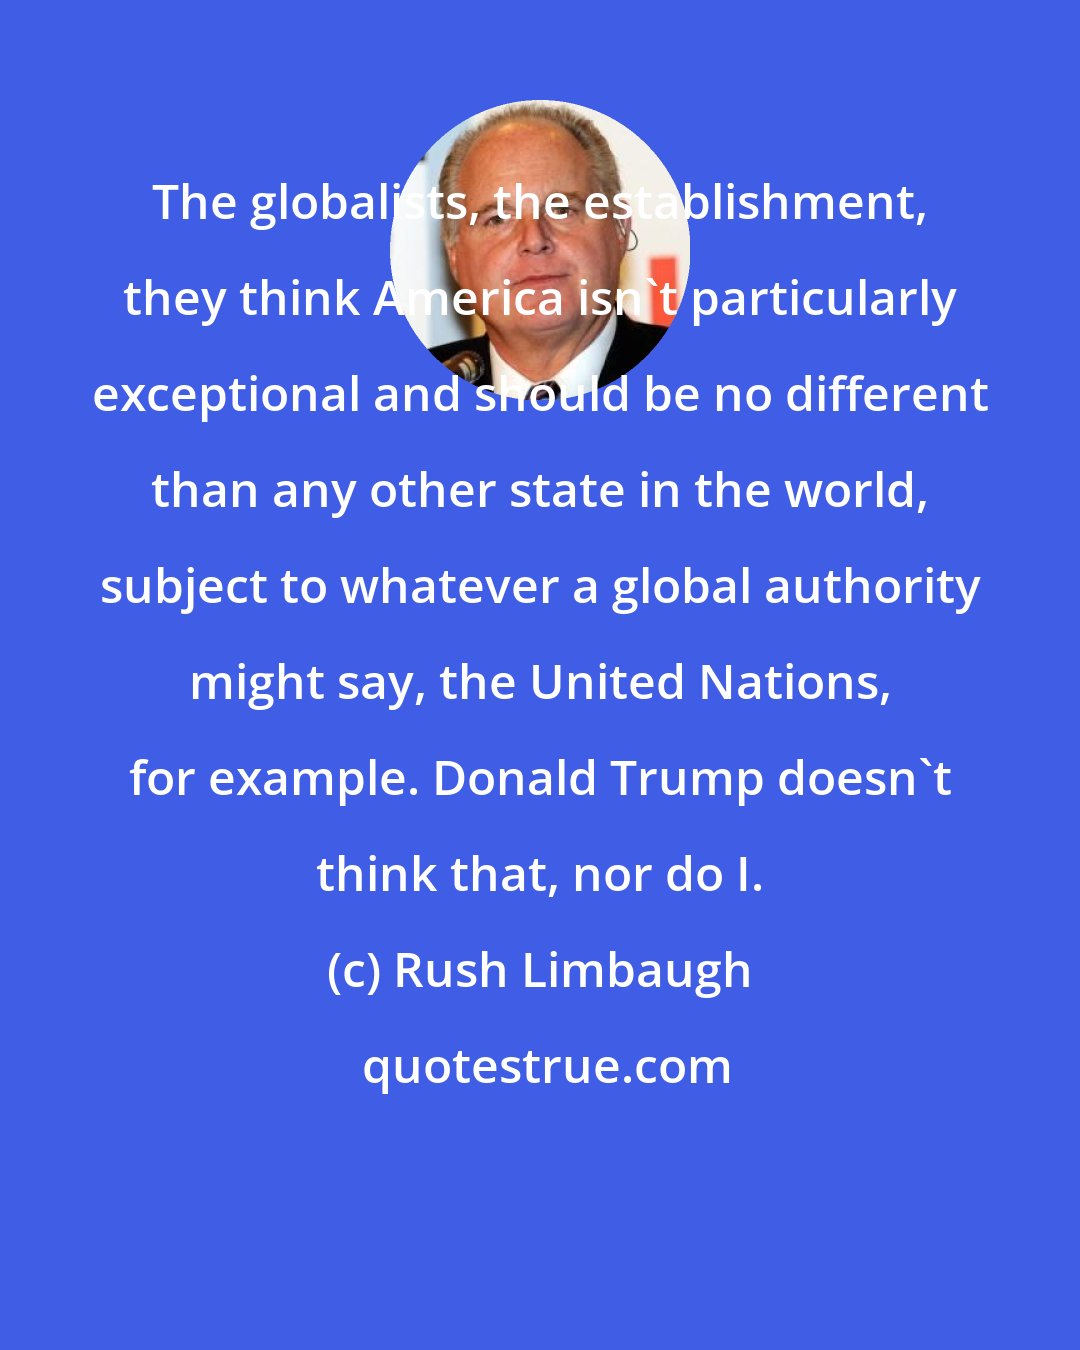 Rush Limbaugh: The globalists, the establishment, they think America isn't particularly exceptional and should be no different than any other state in the world, subject to whatever a global authority might say, the United Nations, for example. Donald Trump doesn't think that, nor do I.